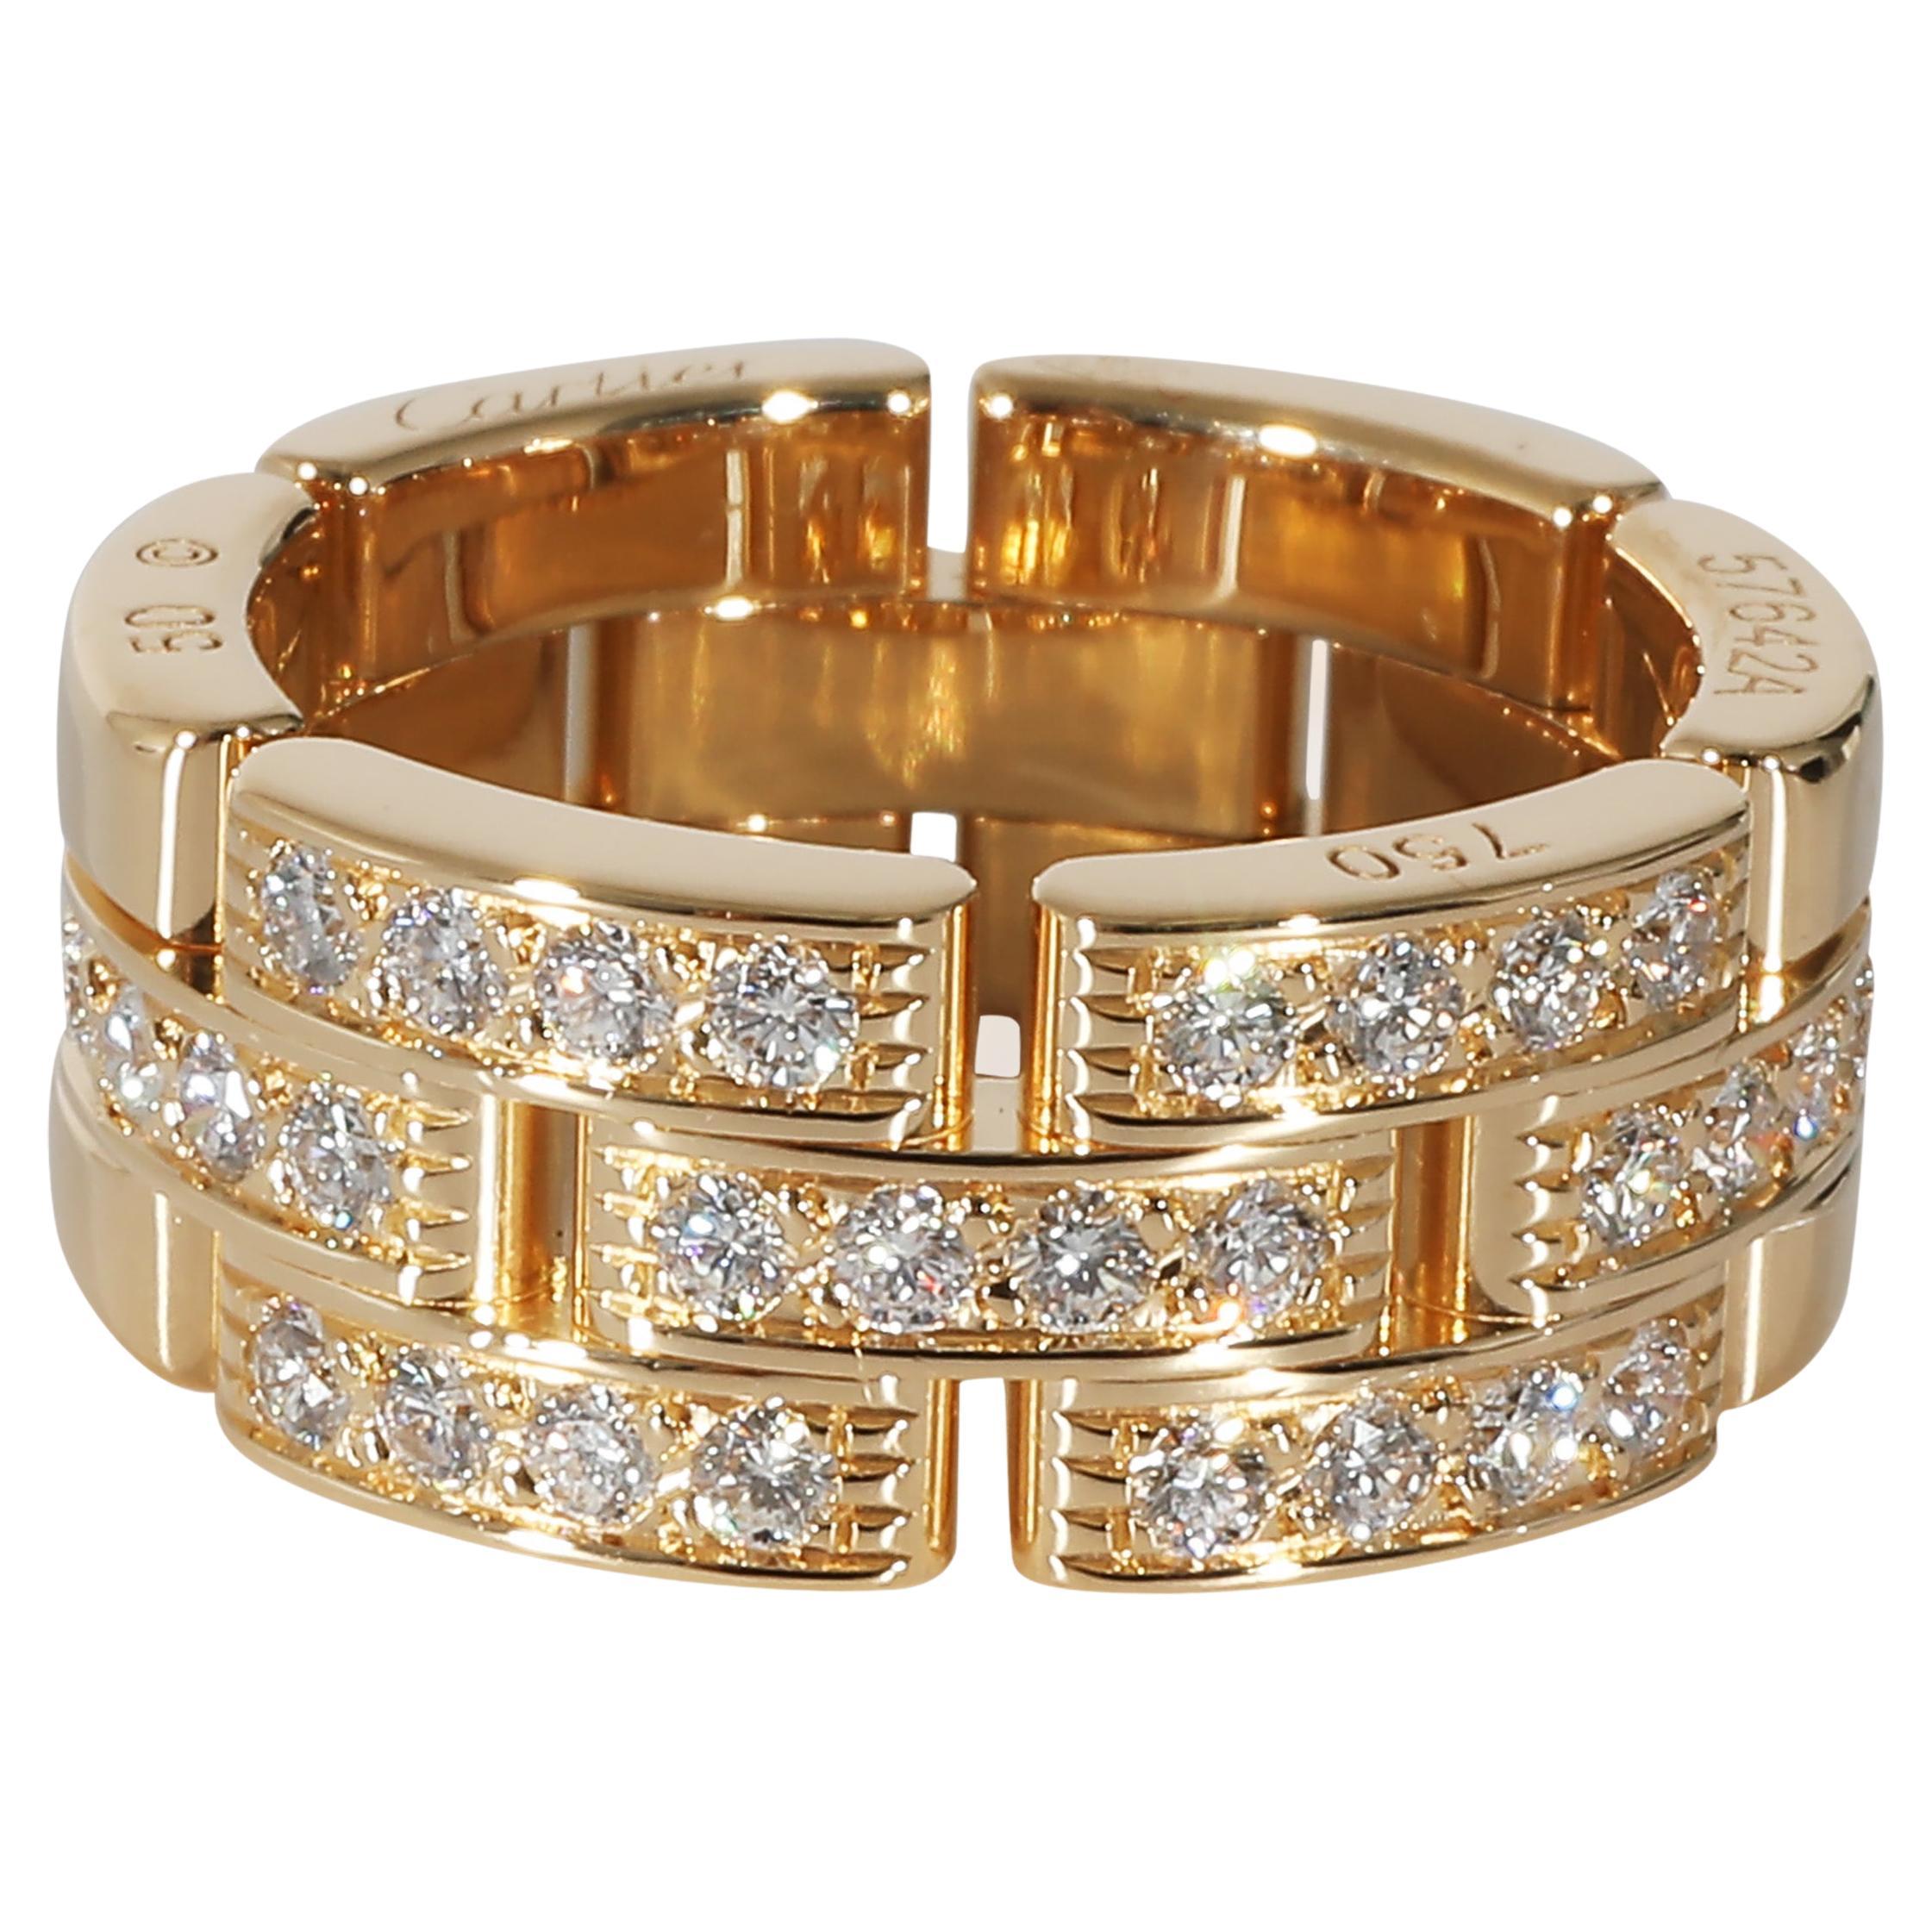 Cartier Maillon Panthere Band in 18k Yellow Gold 0.53 CTW For Sale